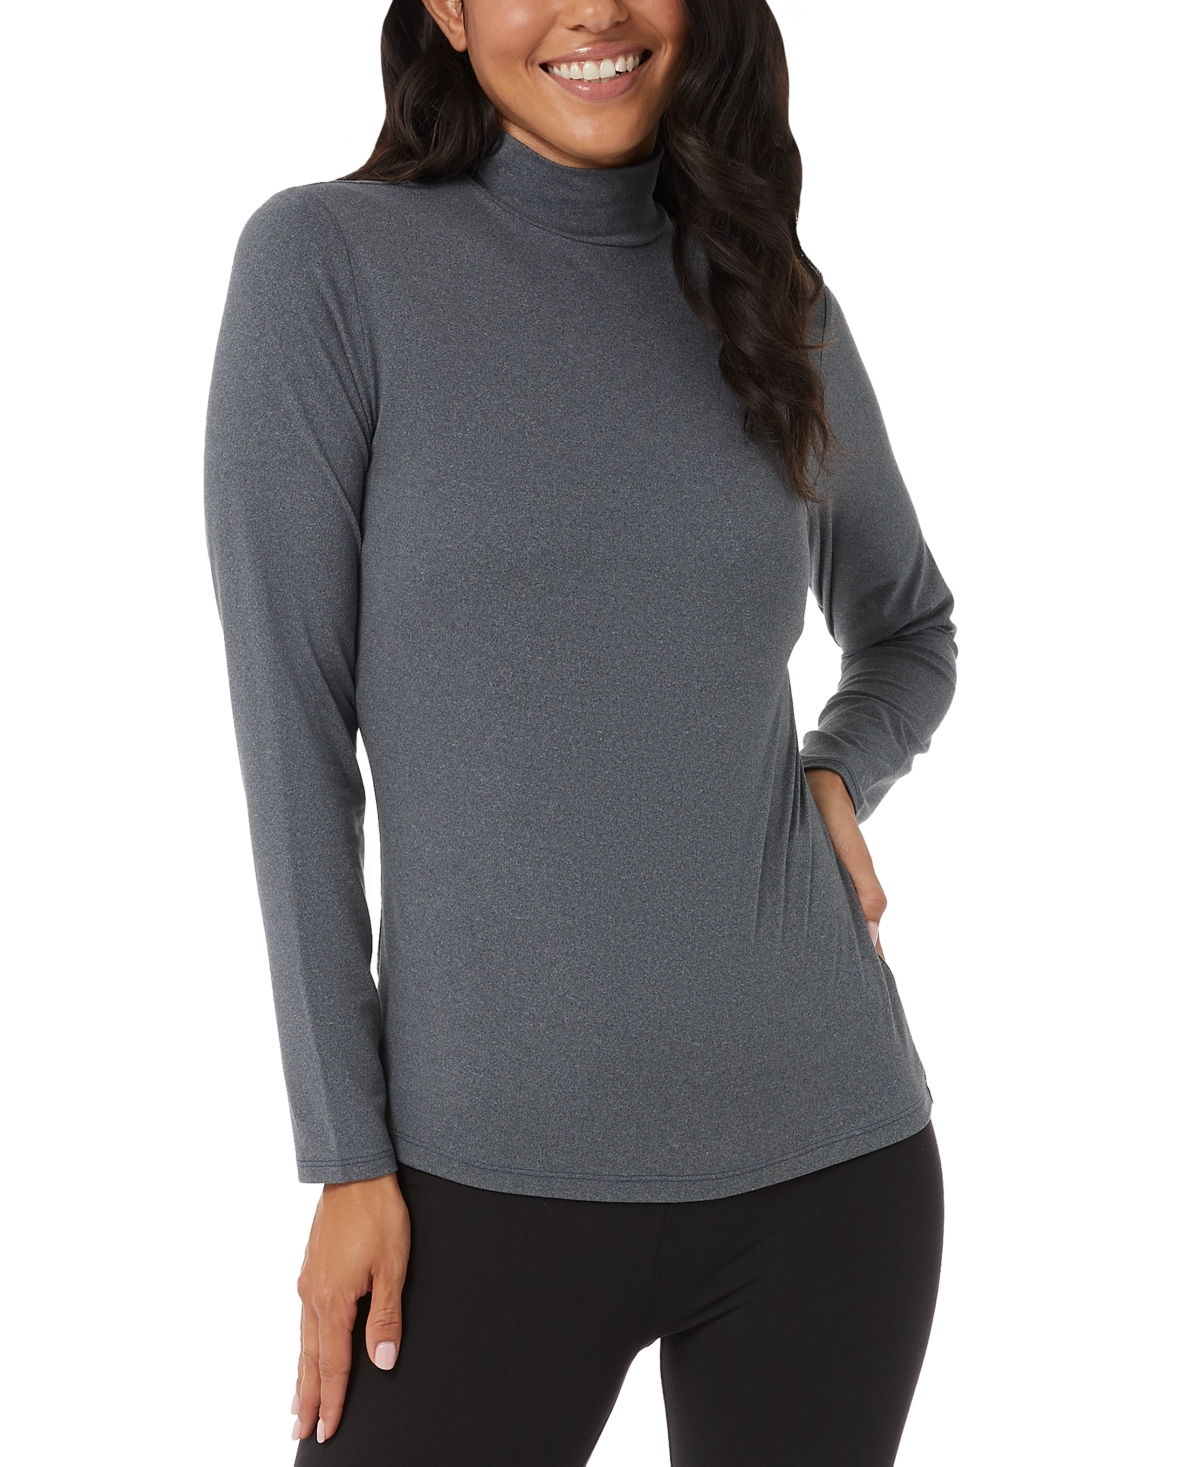 32 Degrees Women's Mock-neck Long-sleeve Top In Ht Charcoal